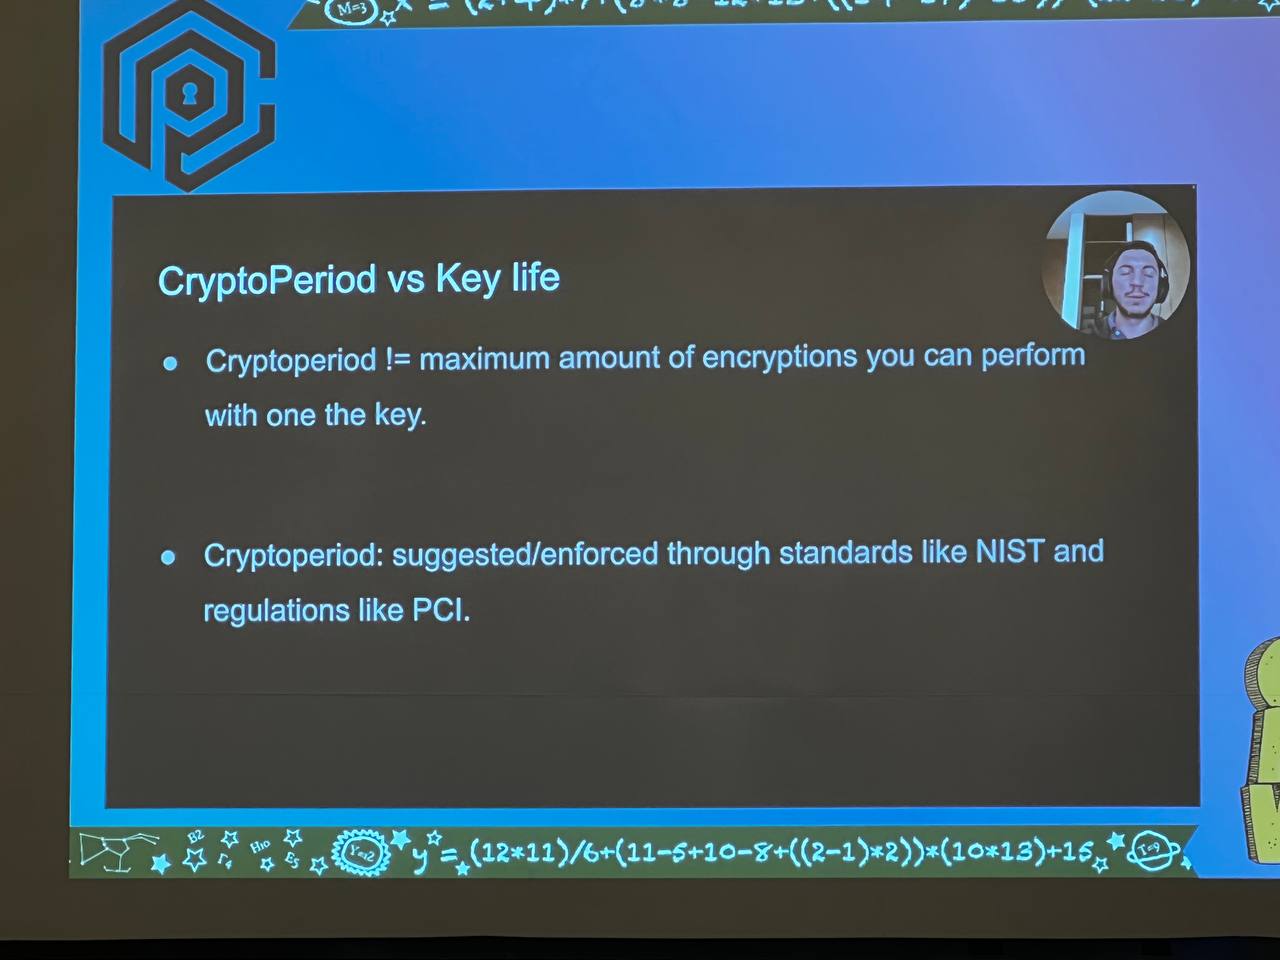 Crypto period vs key life. Crypto period is not the maximum amount of encryptions you can perform with one key. Crypto period is suggested or enforced through regulations like PCI and standards like NIST.